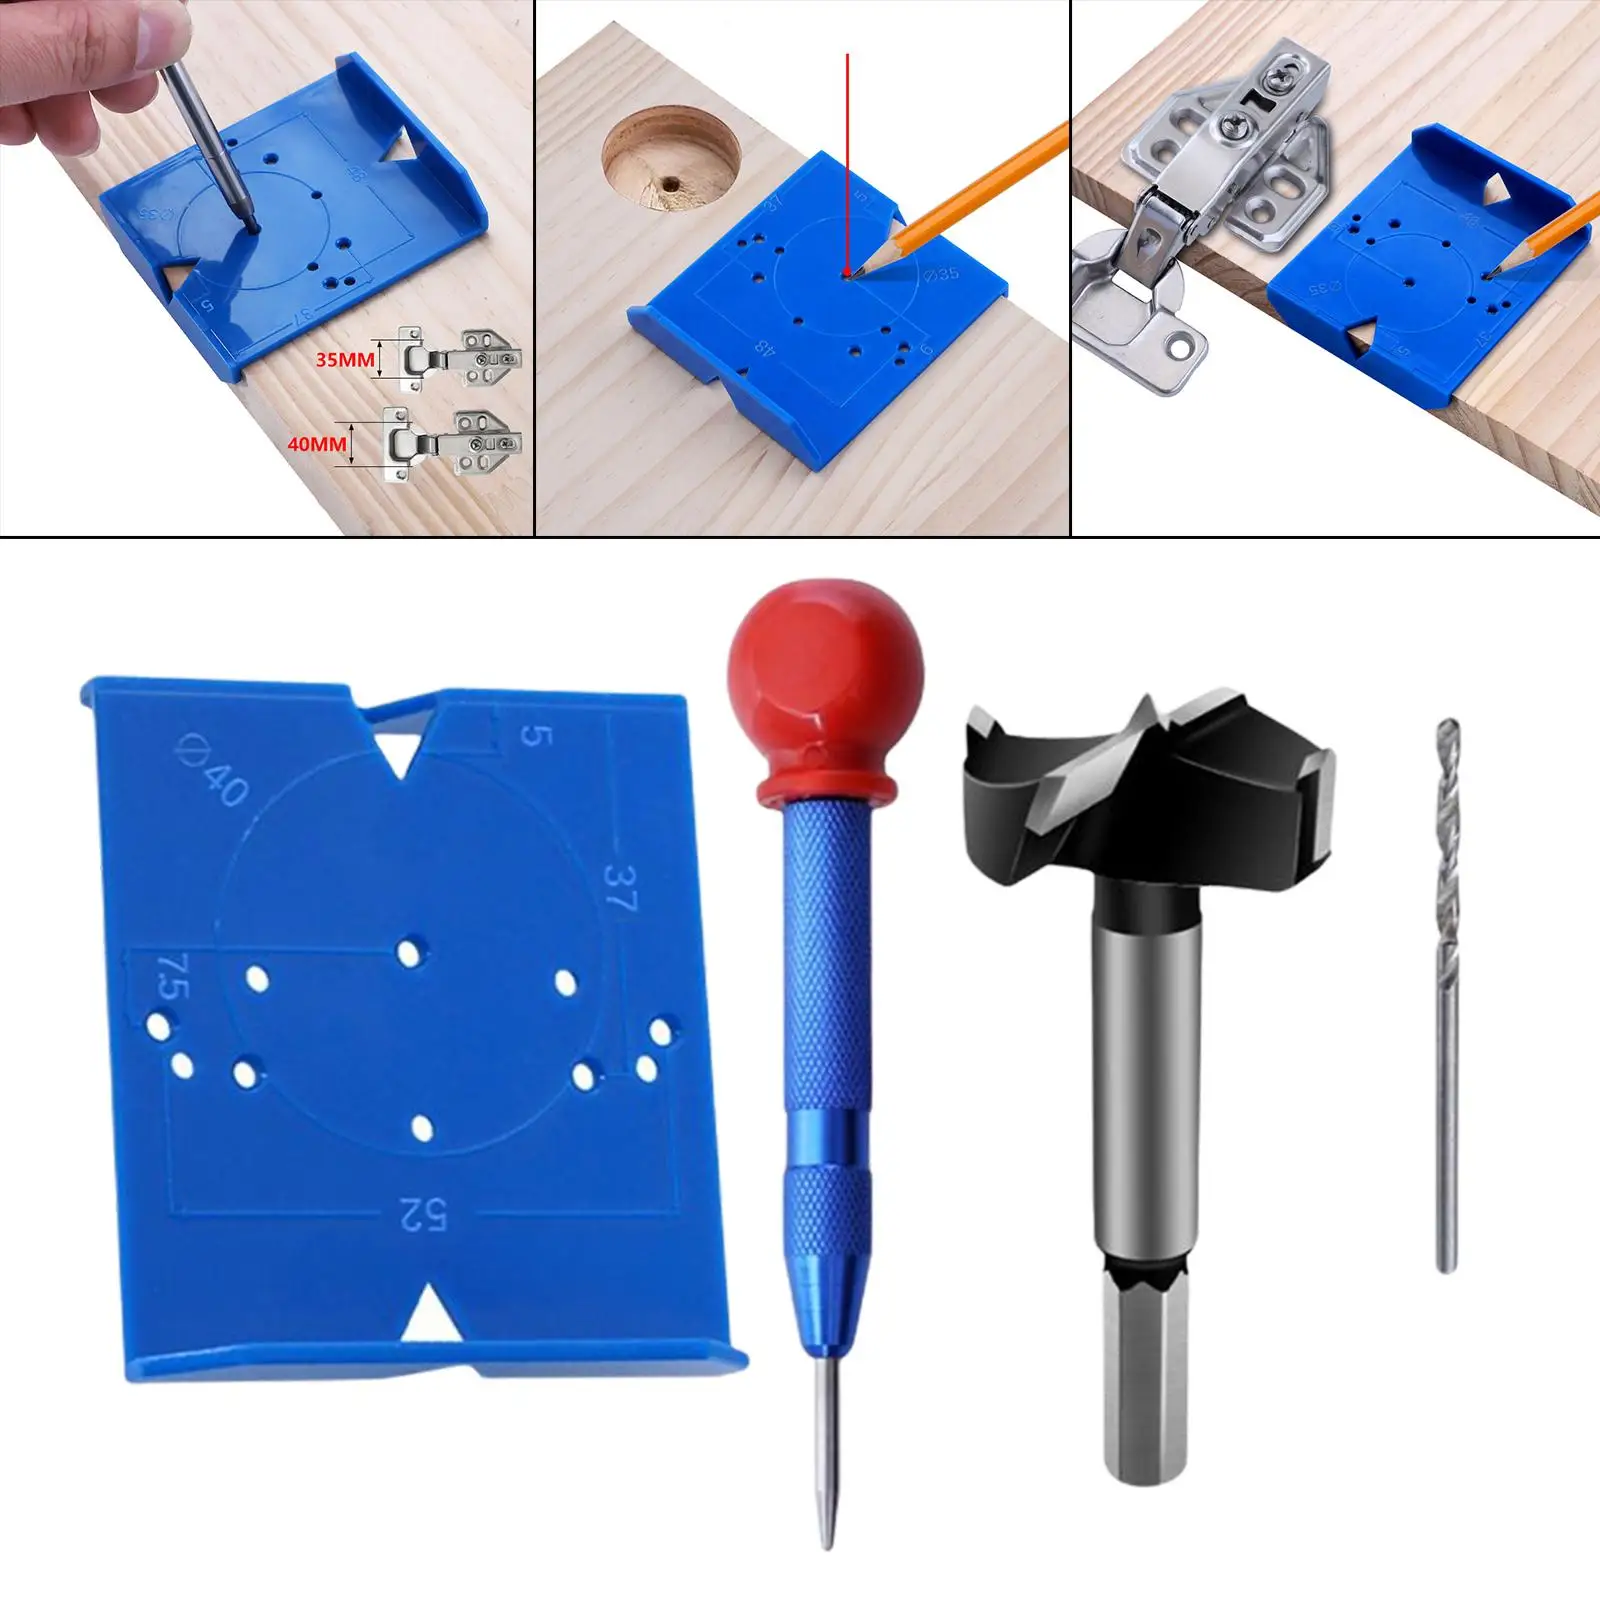 Drill Bit Hinge Hole Positioning Ruler Hinge Opening  Hinge Hole Drilling Guide  for Cupboard Closet Cabinet Door